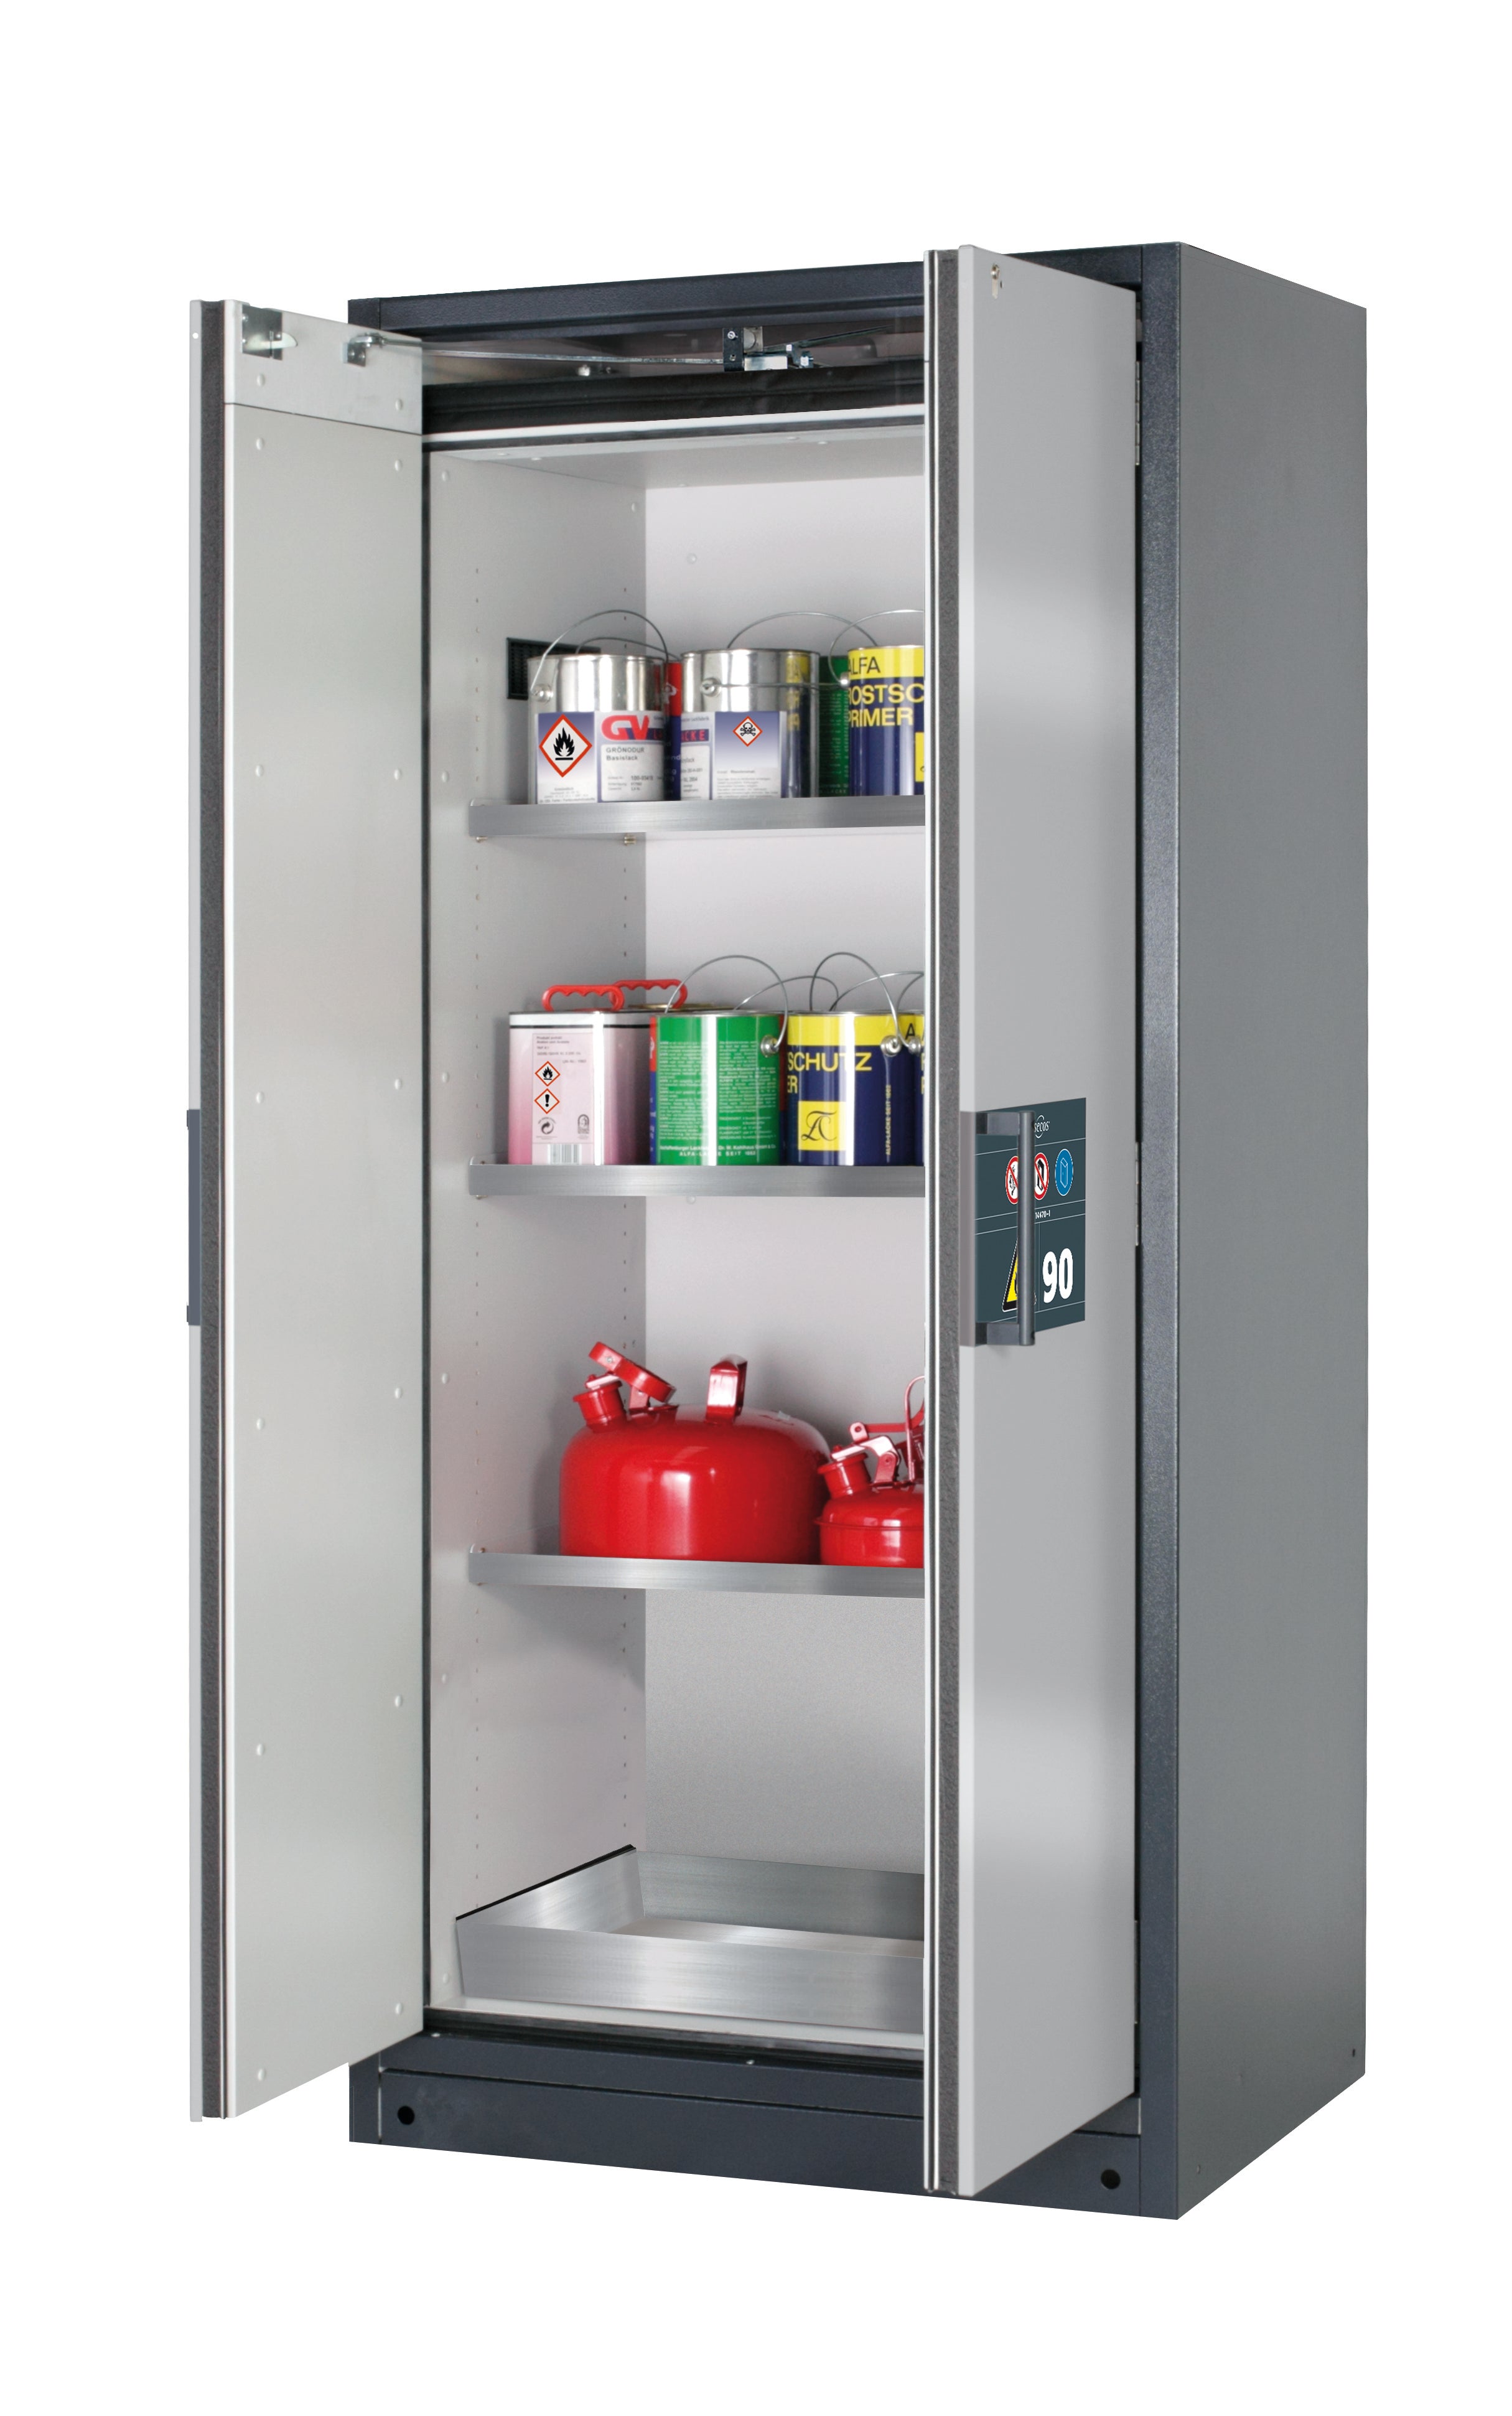 Type 90 safety storage cabinet Q-PEGASUS-90 model Q90.195.090.WDAC in asecos silver with 3x shelf standard (stainless steel 1.4301),